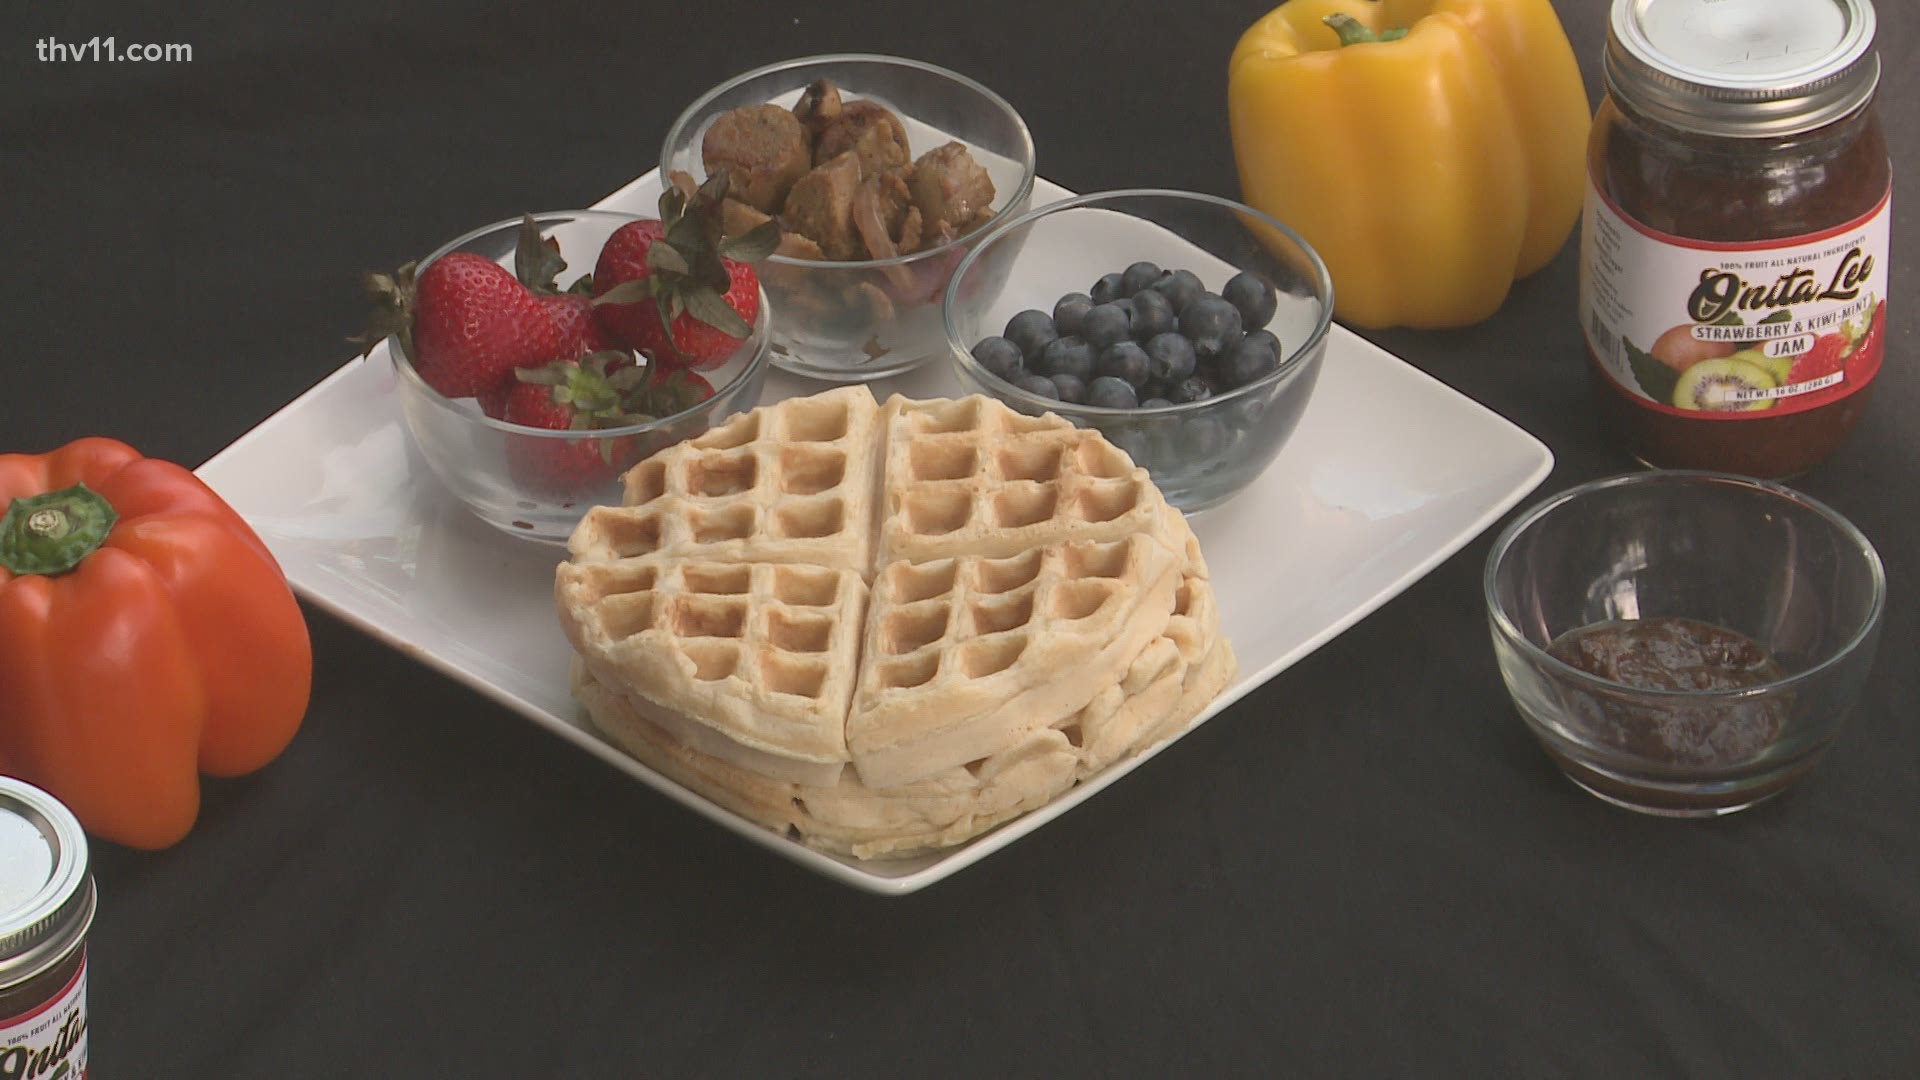 Dr. Tionna Jenkins with Plate it Healthy shows us how to make a vegan breakfast with waffles, sausage, fruit and more.